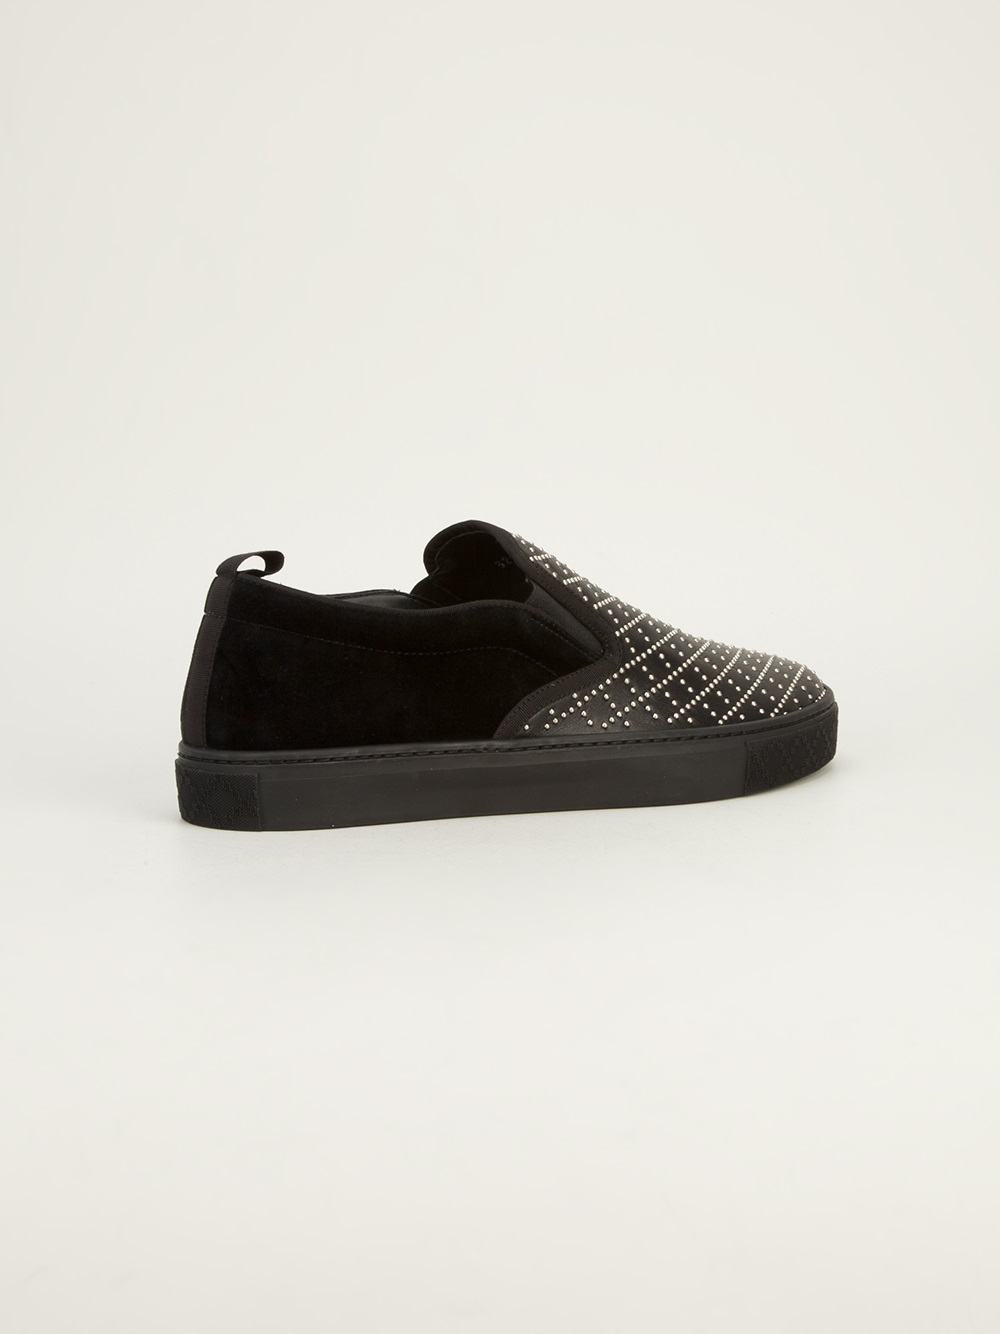 Lyst - Gucci Checked Plimsoll in Black for Men